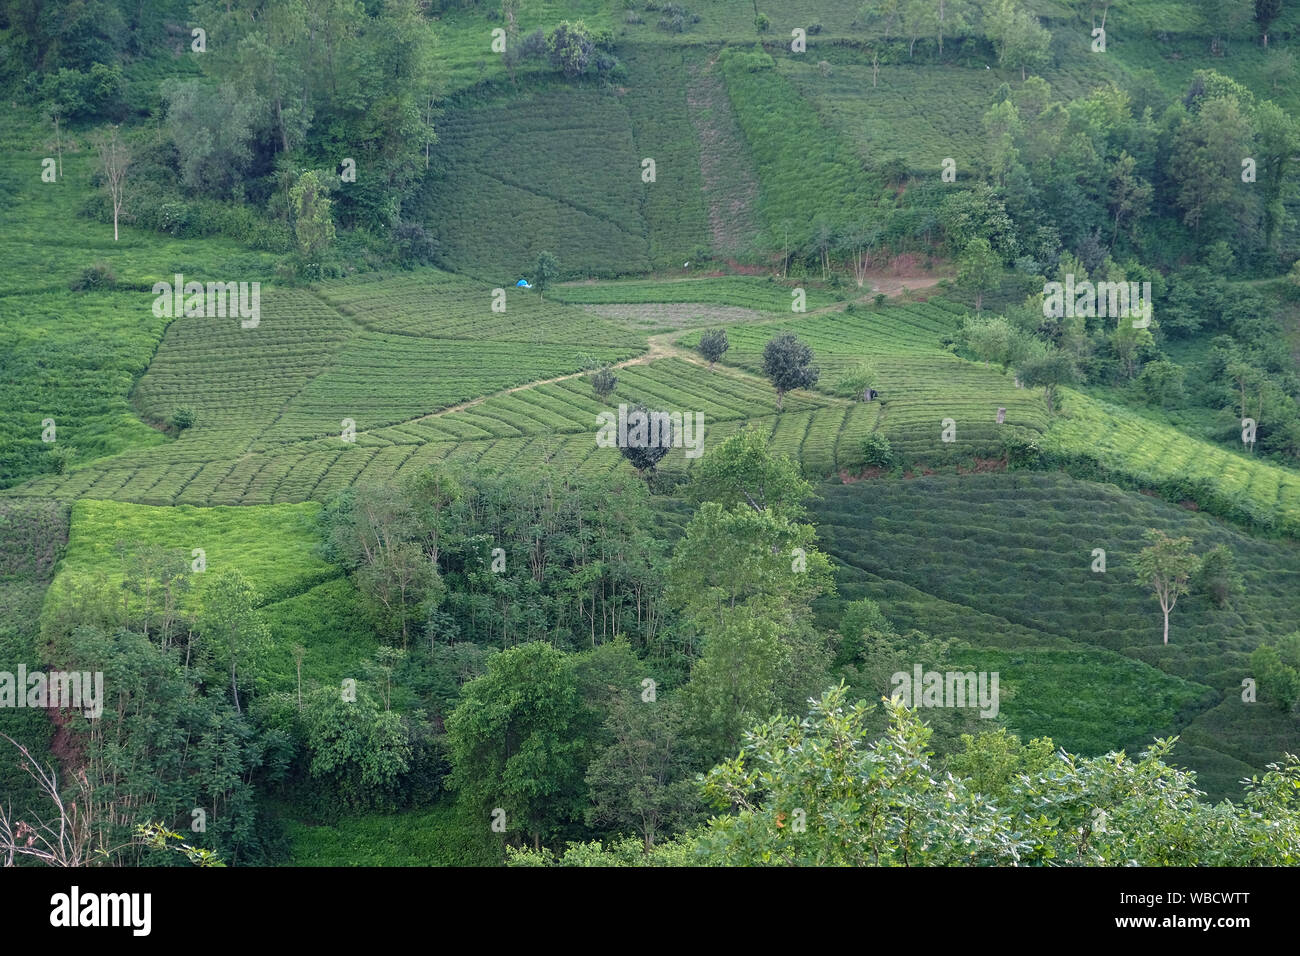 tea plant field and trees in iyidere trabzon turkey Stock Photo